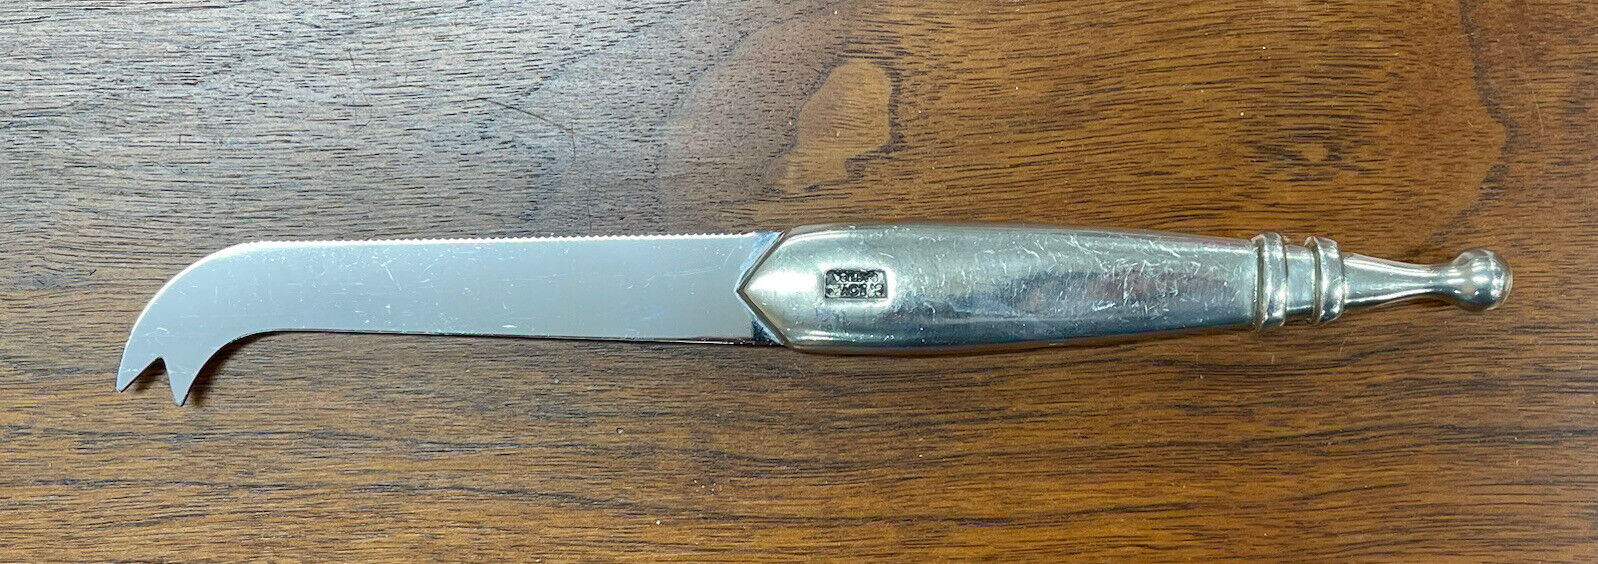 Vintage CARROL BOYES South Africa Serrated Cheese Knife